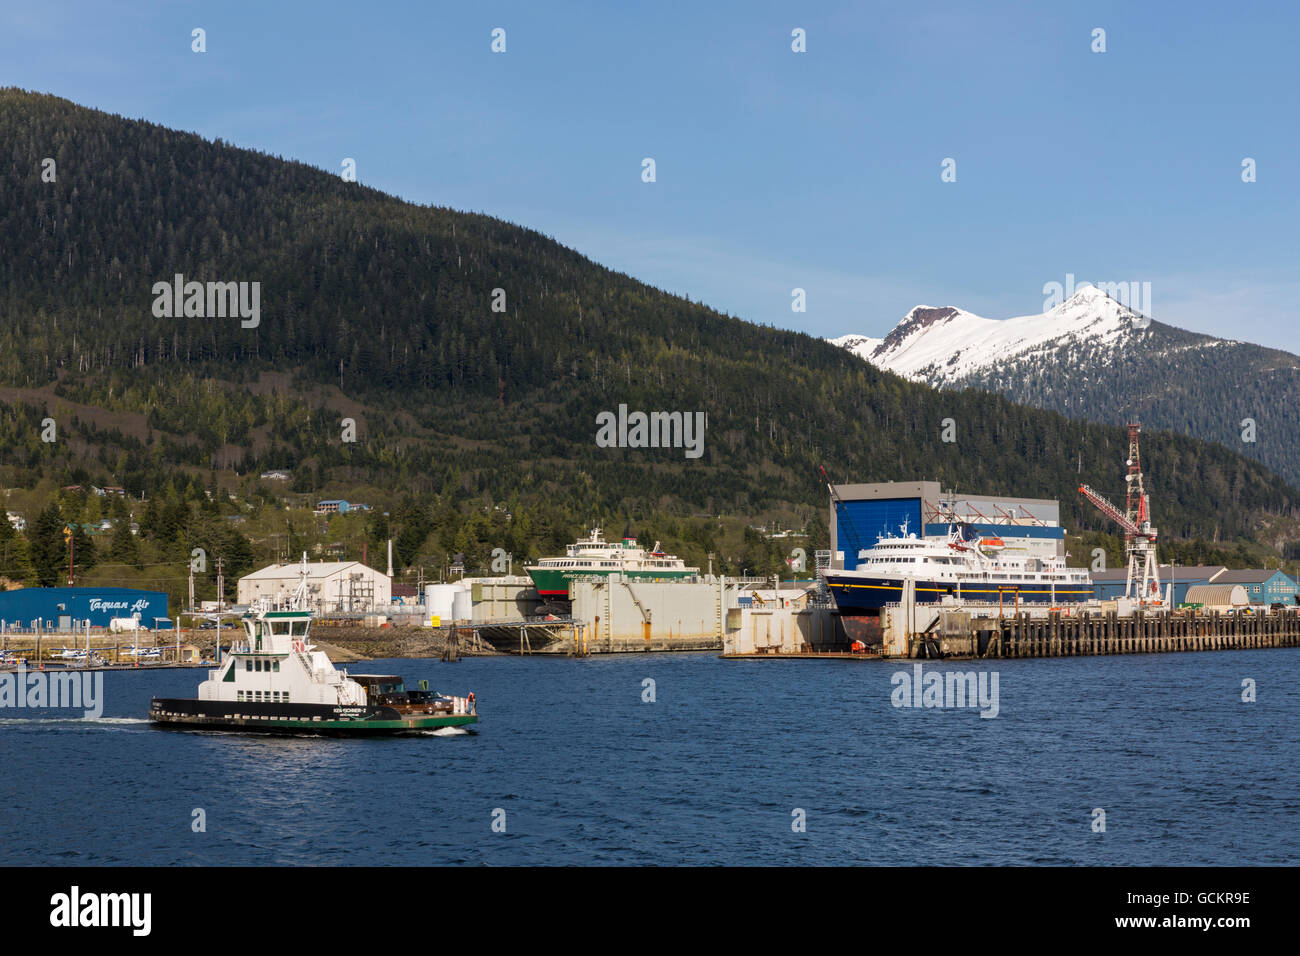 Airport passenger ferry passes in front of the waterfront docks and shipyards, Ketchikan, Southeast Alaska, spring Stock Photo